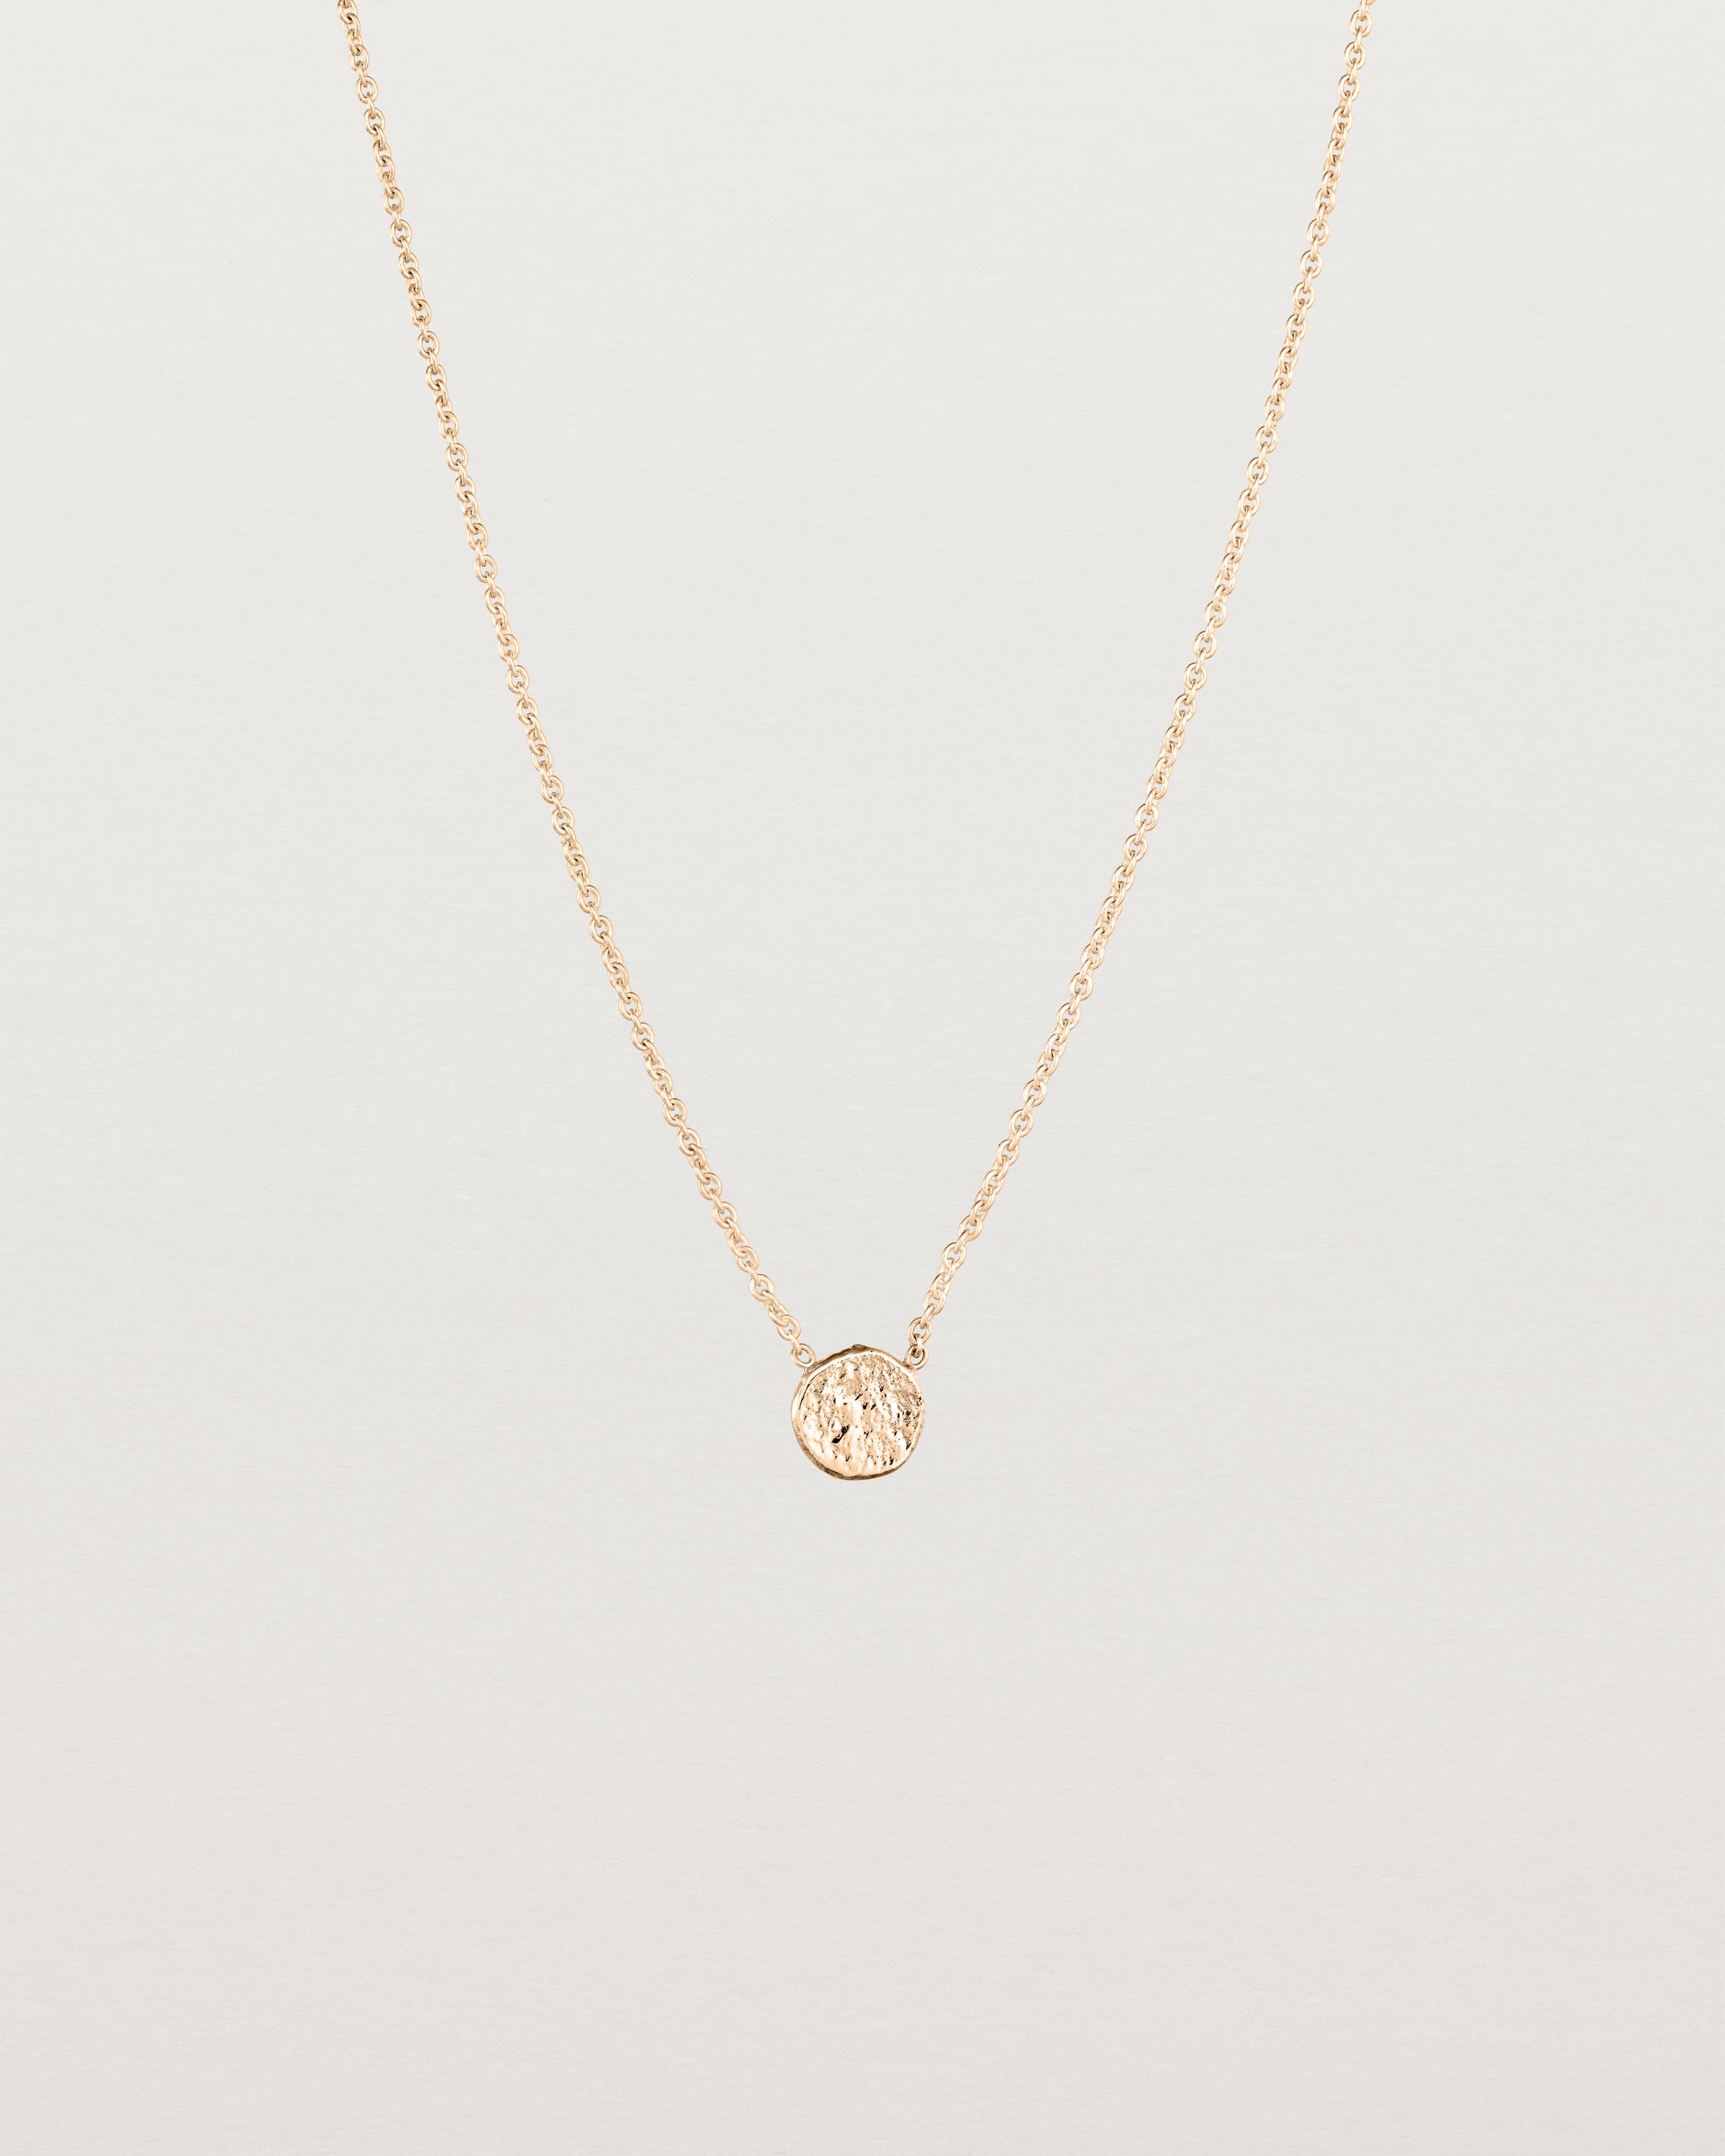 Front view of the Moon Necklace in rose gold.